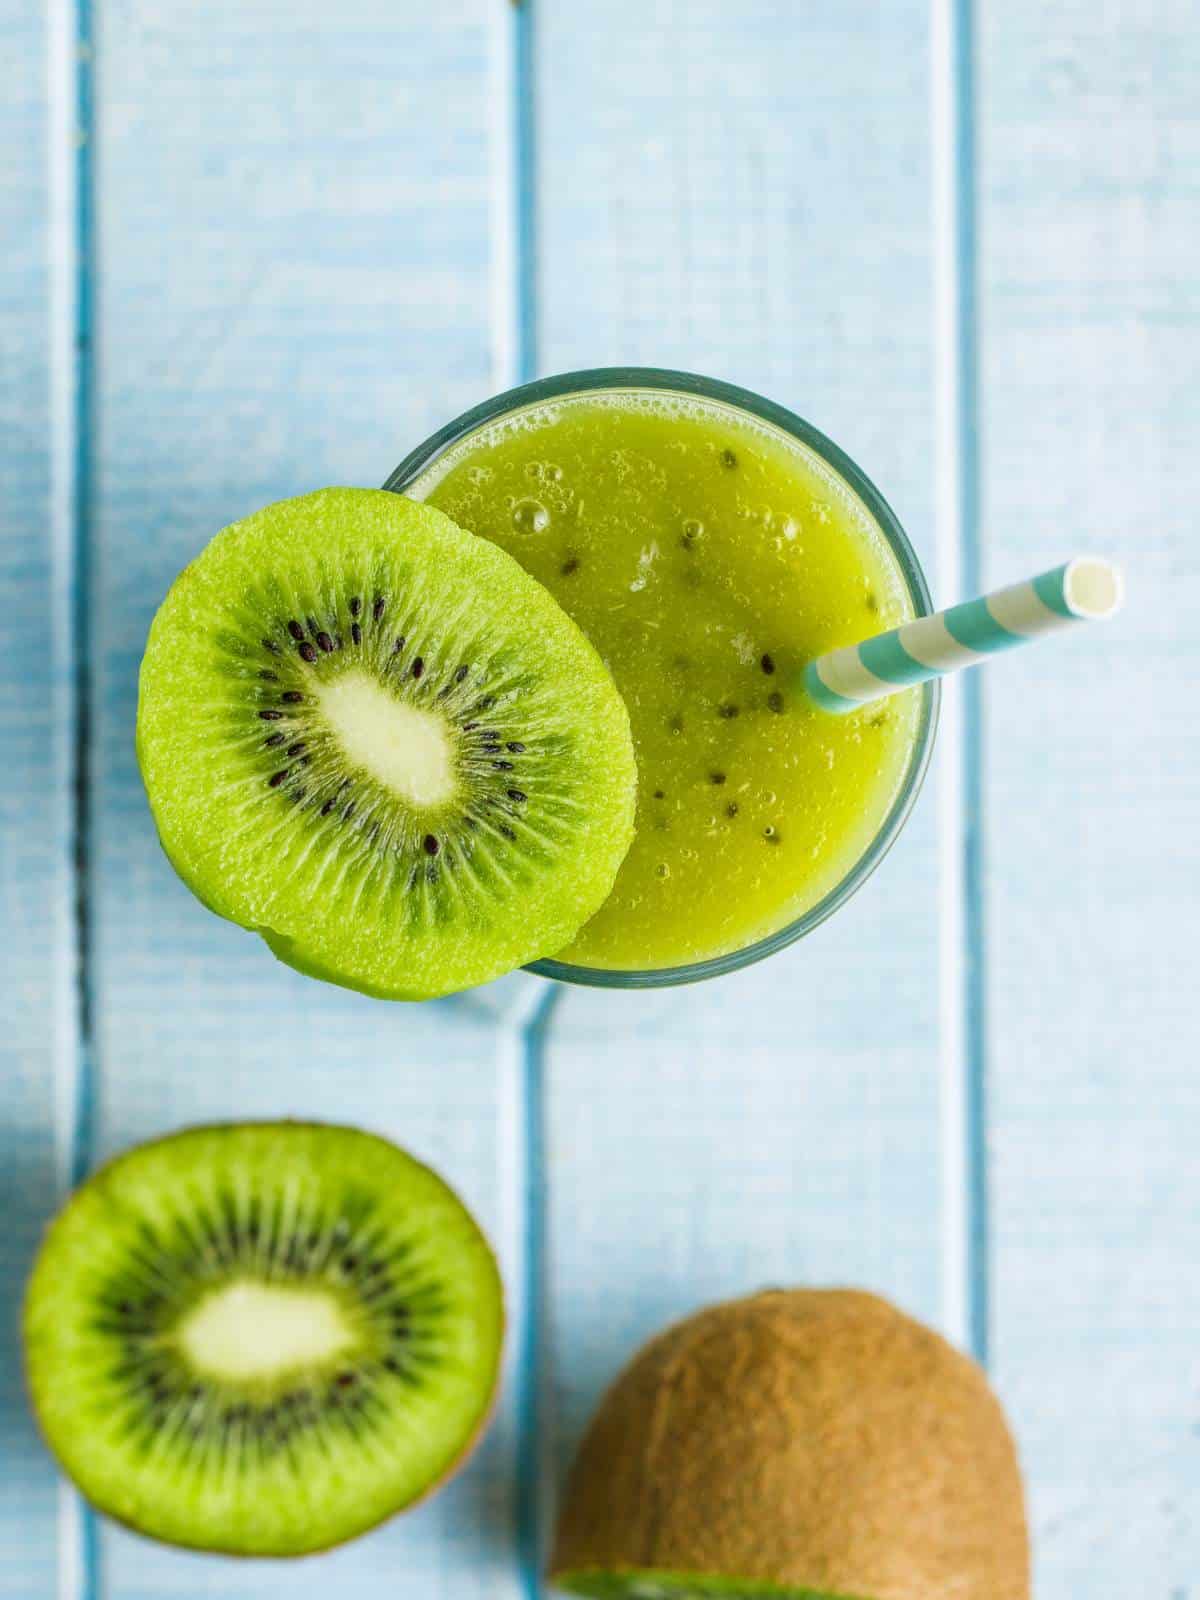 A glass of kiwi juice with a straw and a slice of kiwi sitting on the rim of the glass.